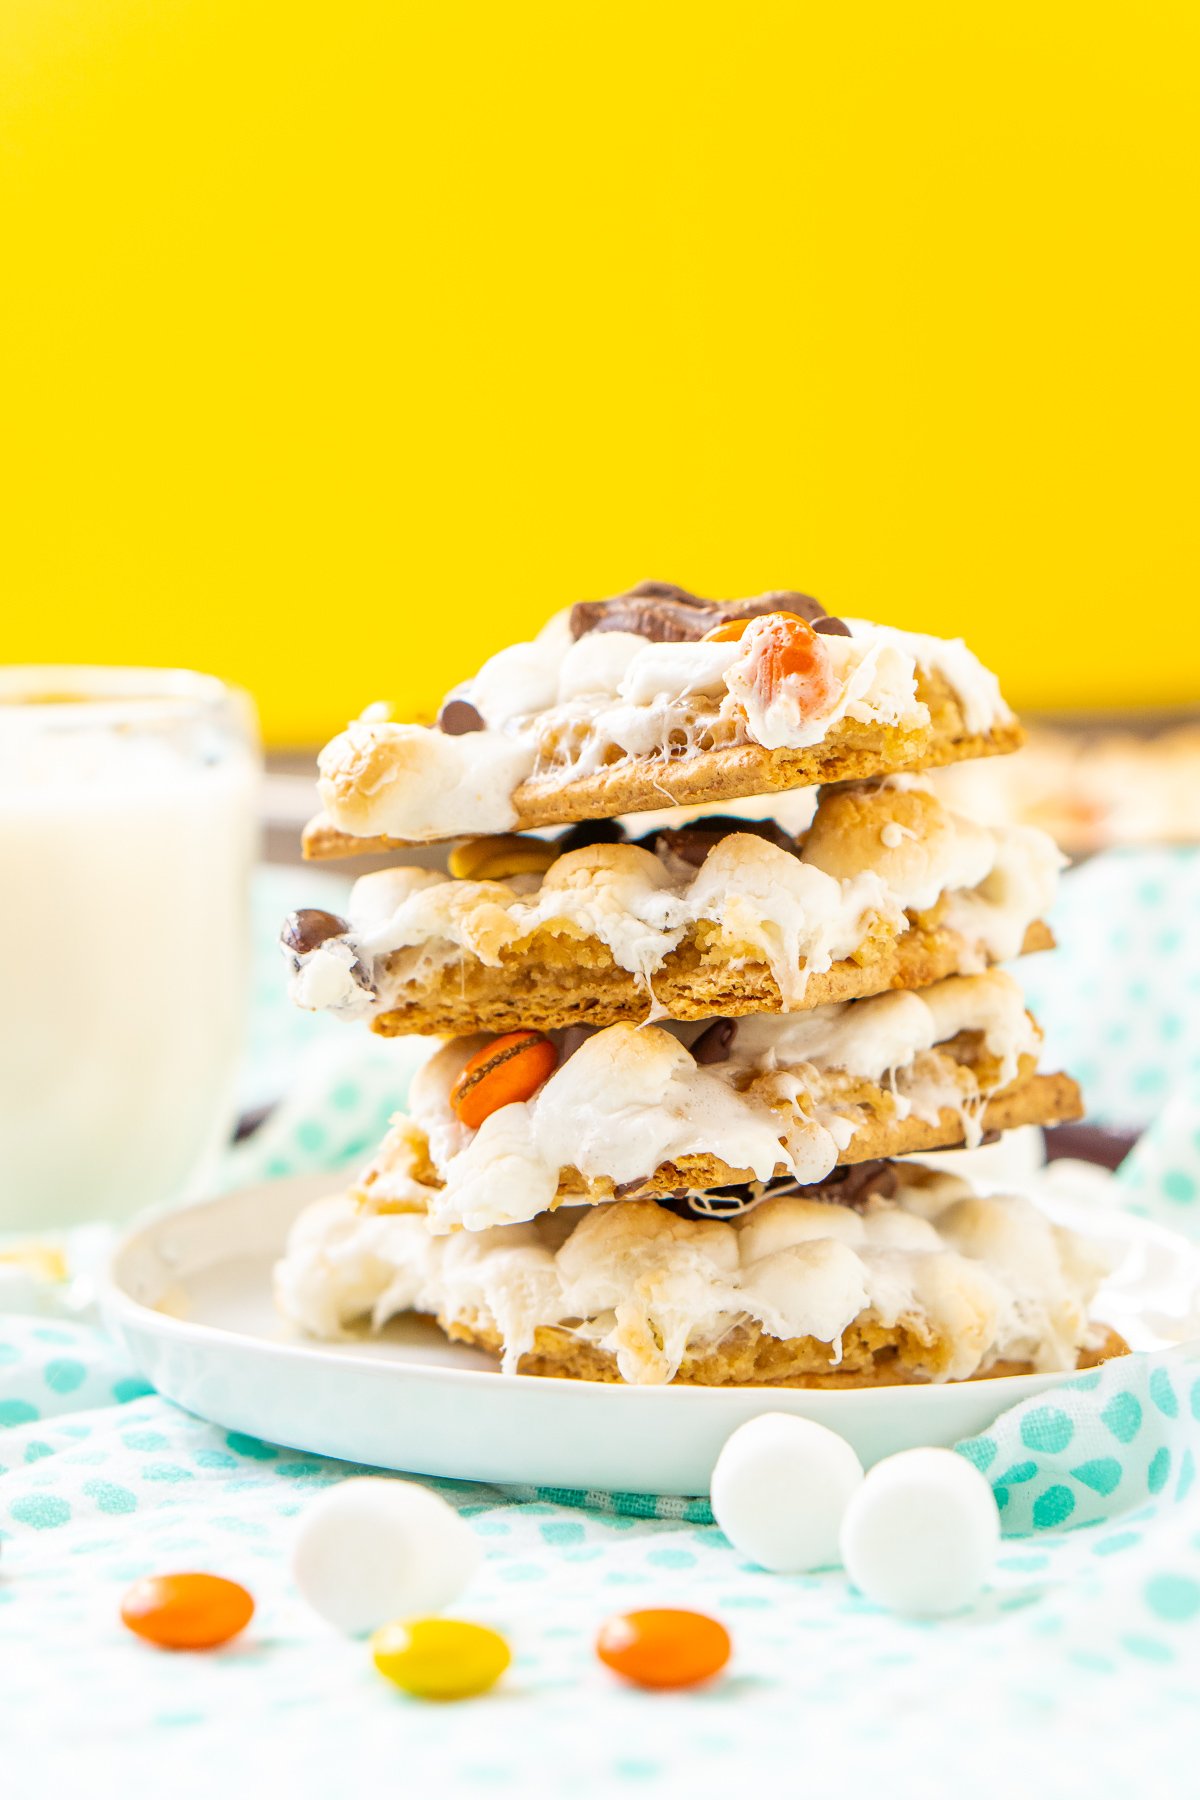 Stack of smores bars on a white plate with a yellow background.